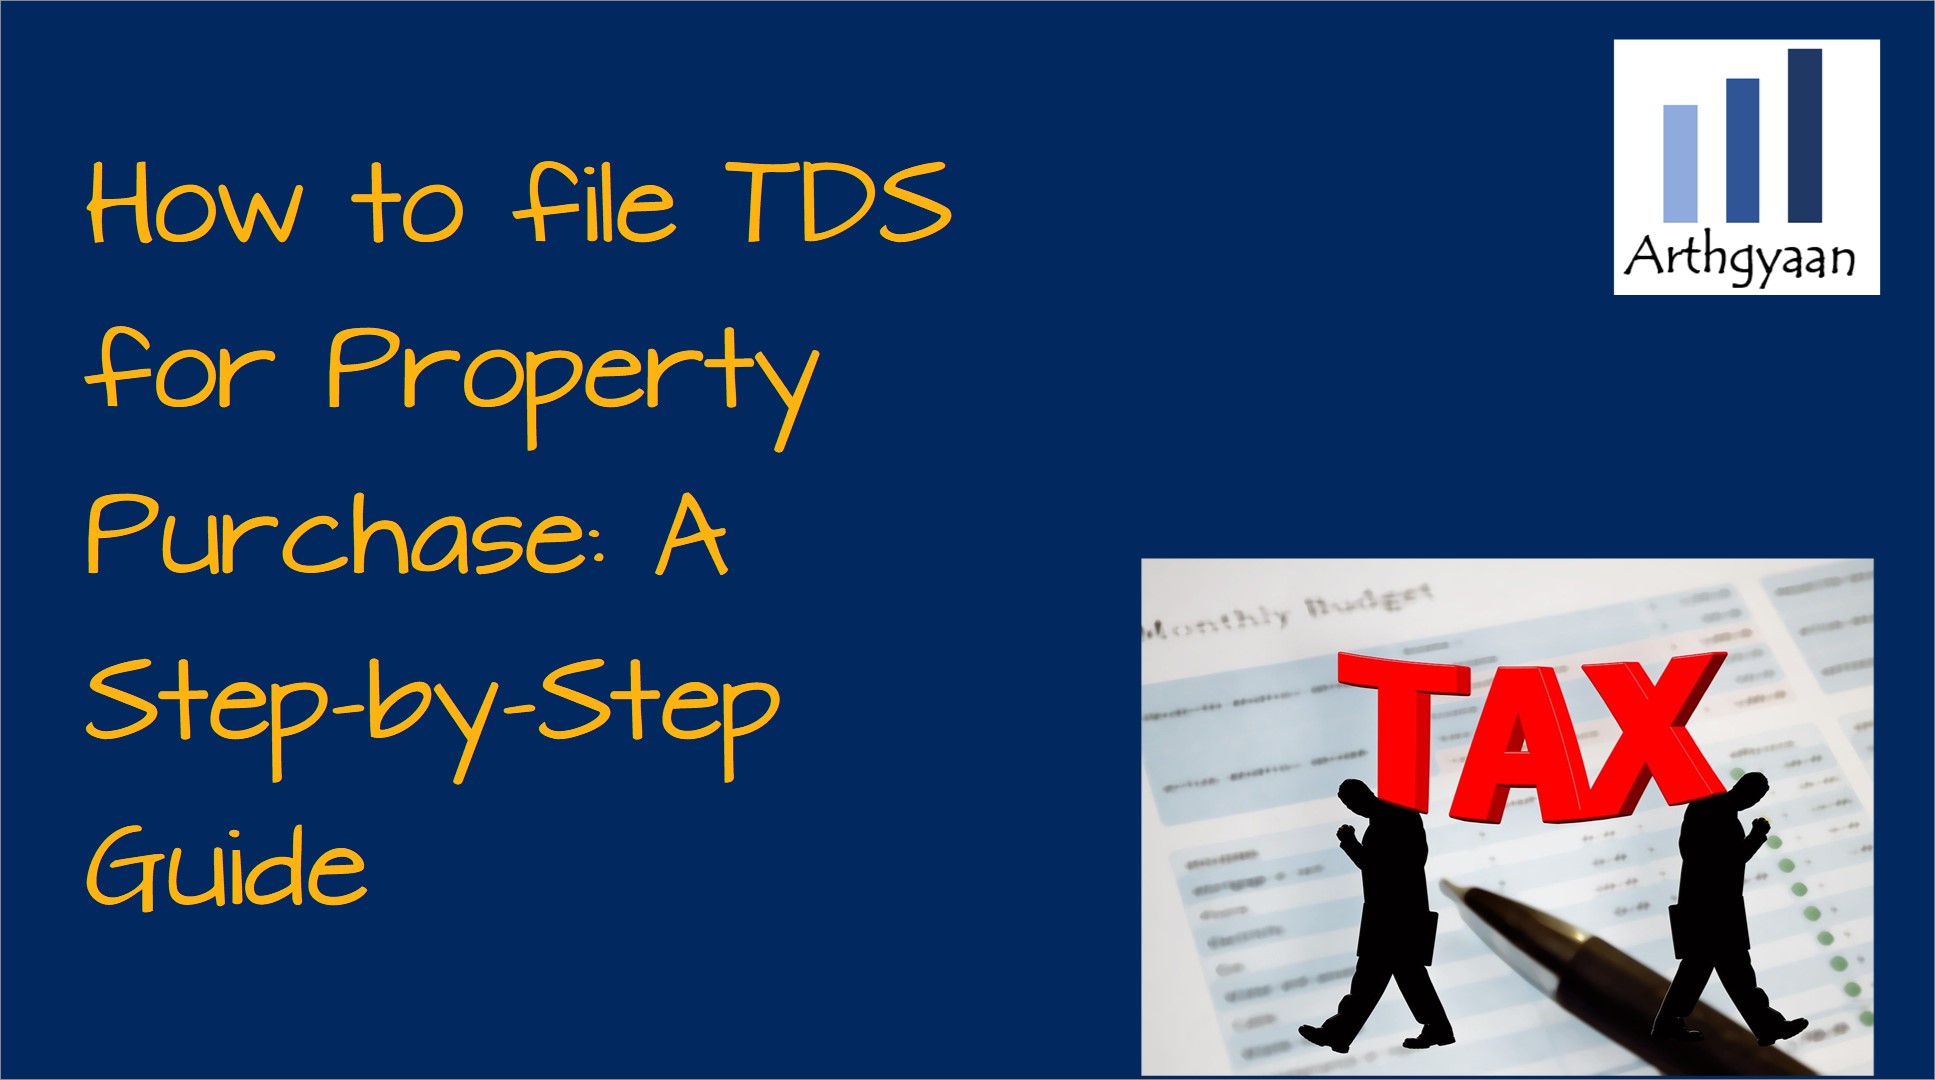 How to file TDS for Property Purchase: A Step-by-Step Guide